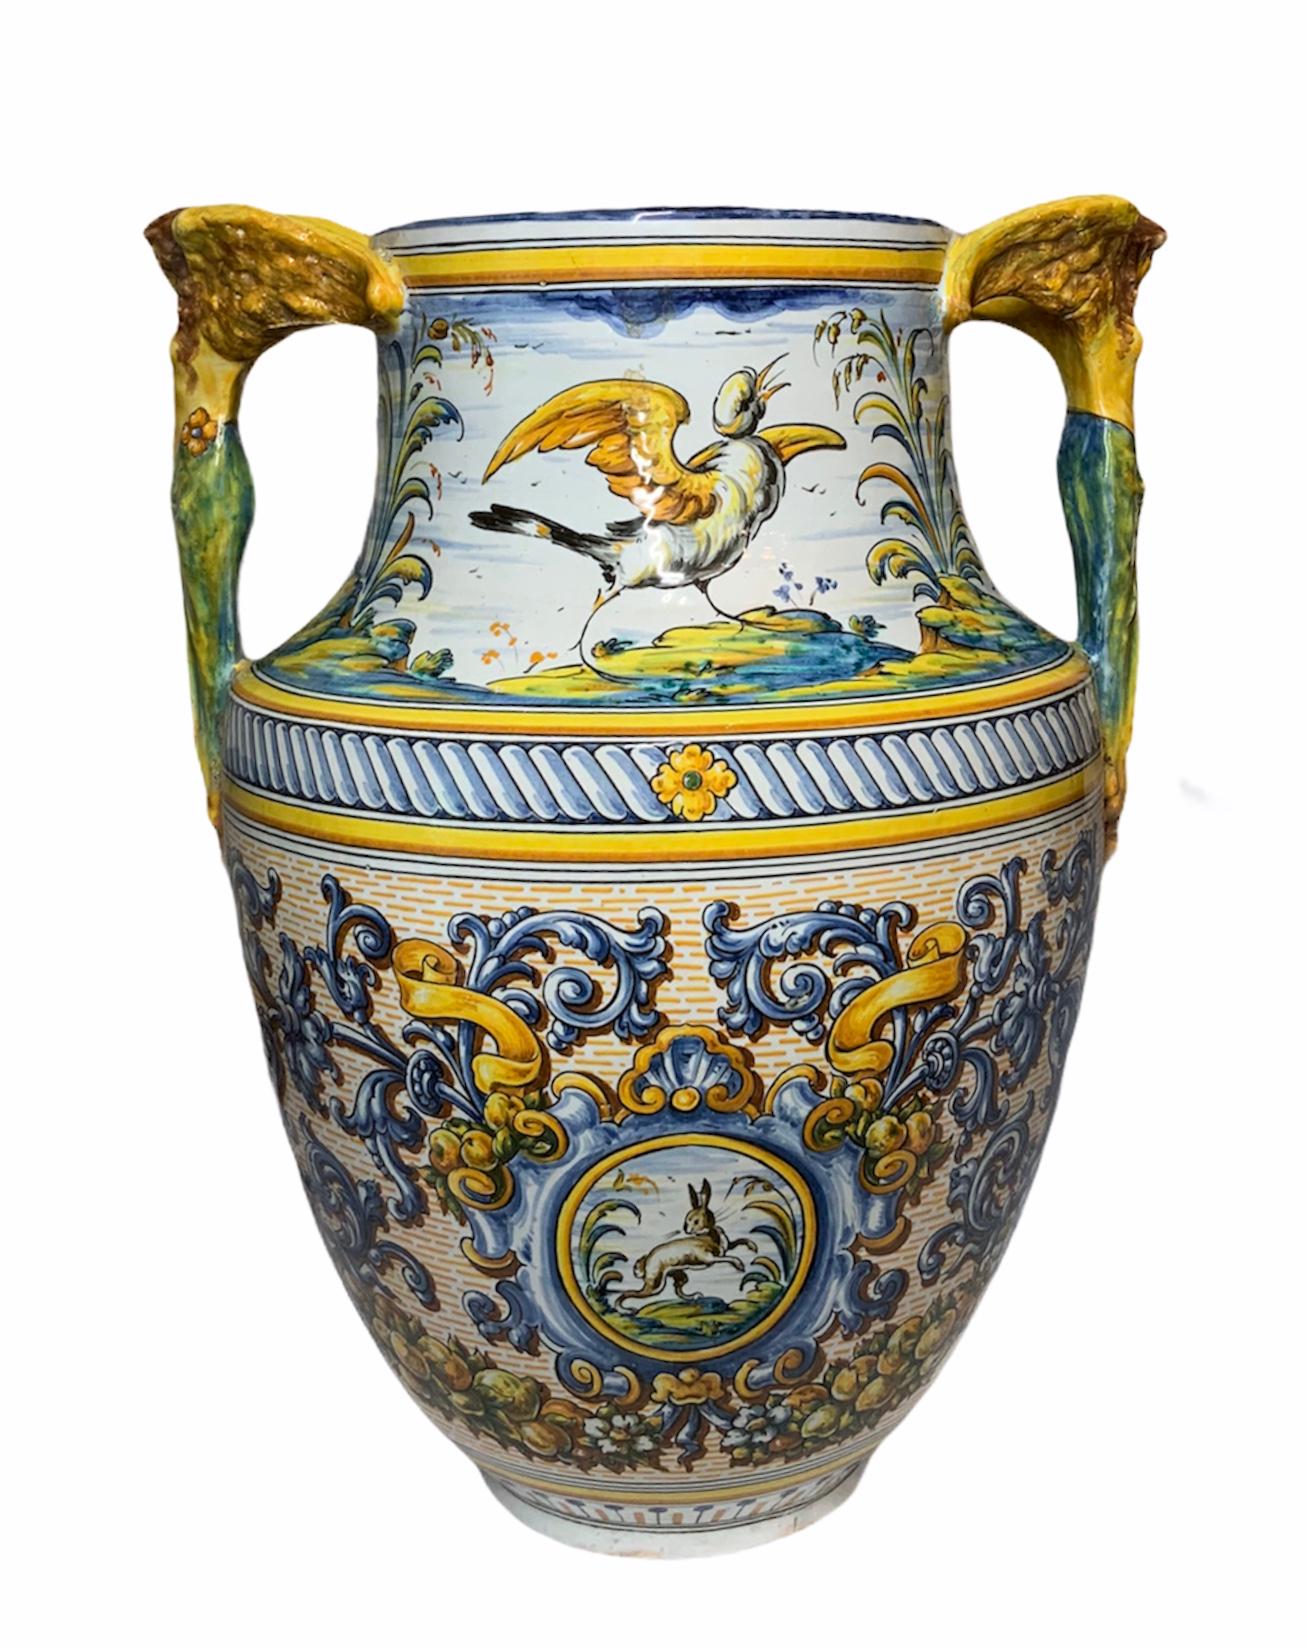 This is a polychromed large urn vase depicting a continuos scene of a running deer and a bird singing in the neck of it; while in the body side there are another continuous images of a bird trying to fly and a hare jumping. Both images are adorned